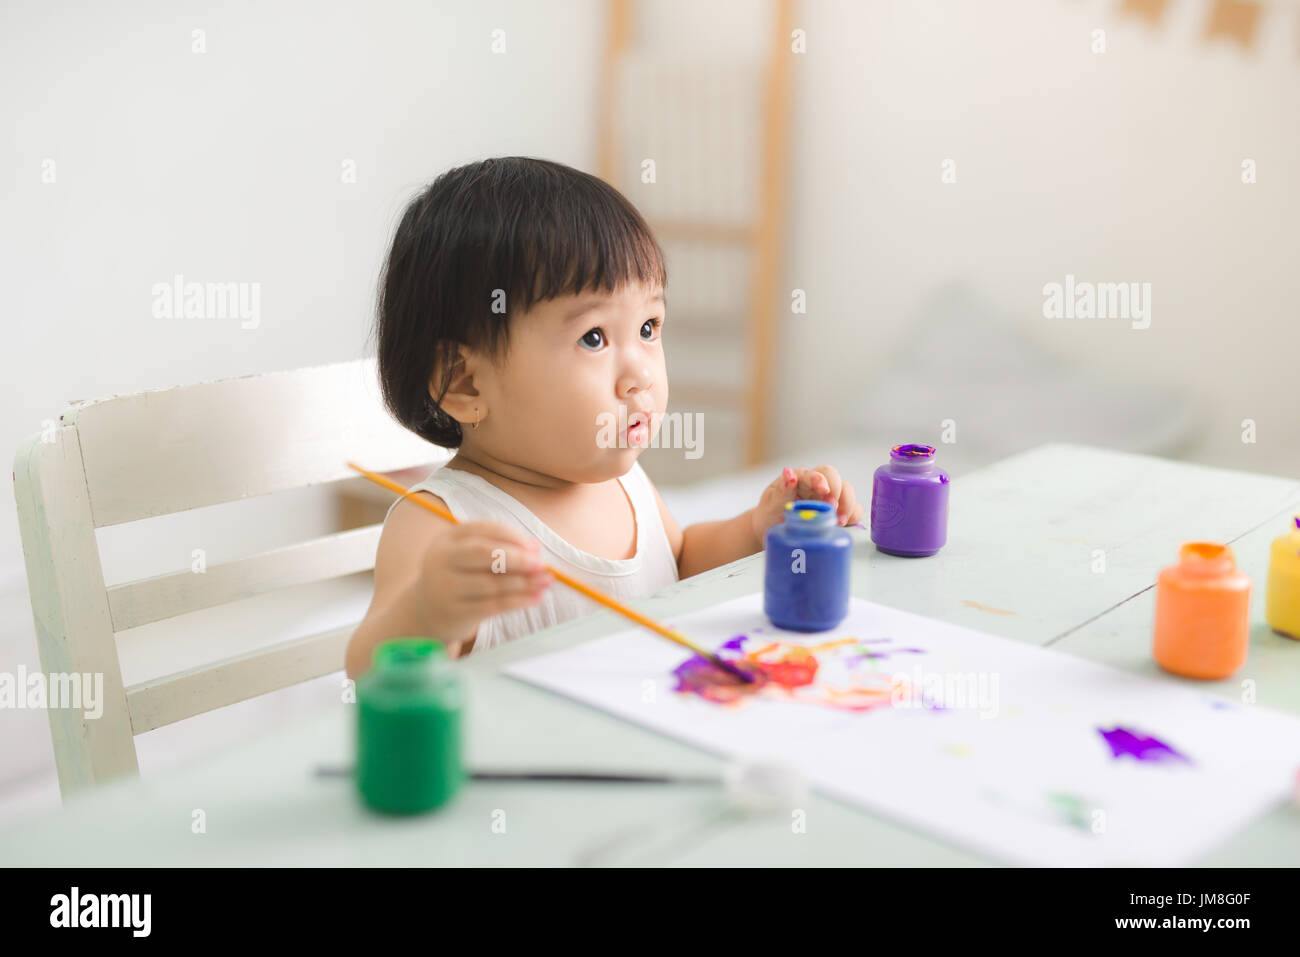 Funny laughing asian baby girl drawing with colorful pencils at home Stock Photo